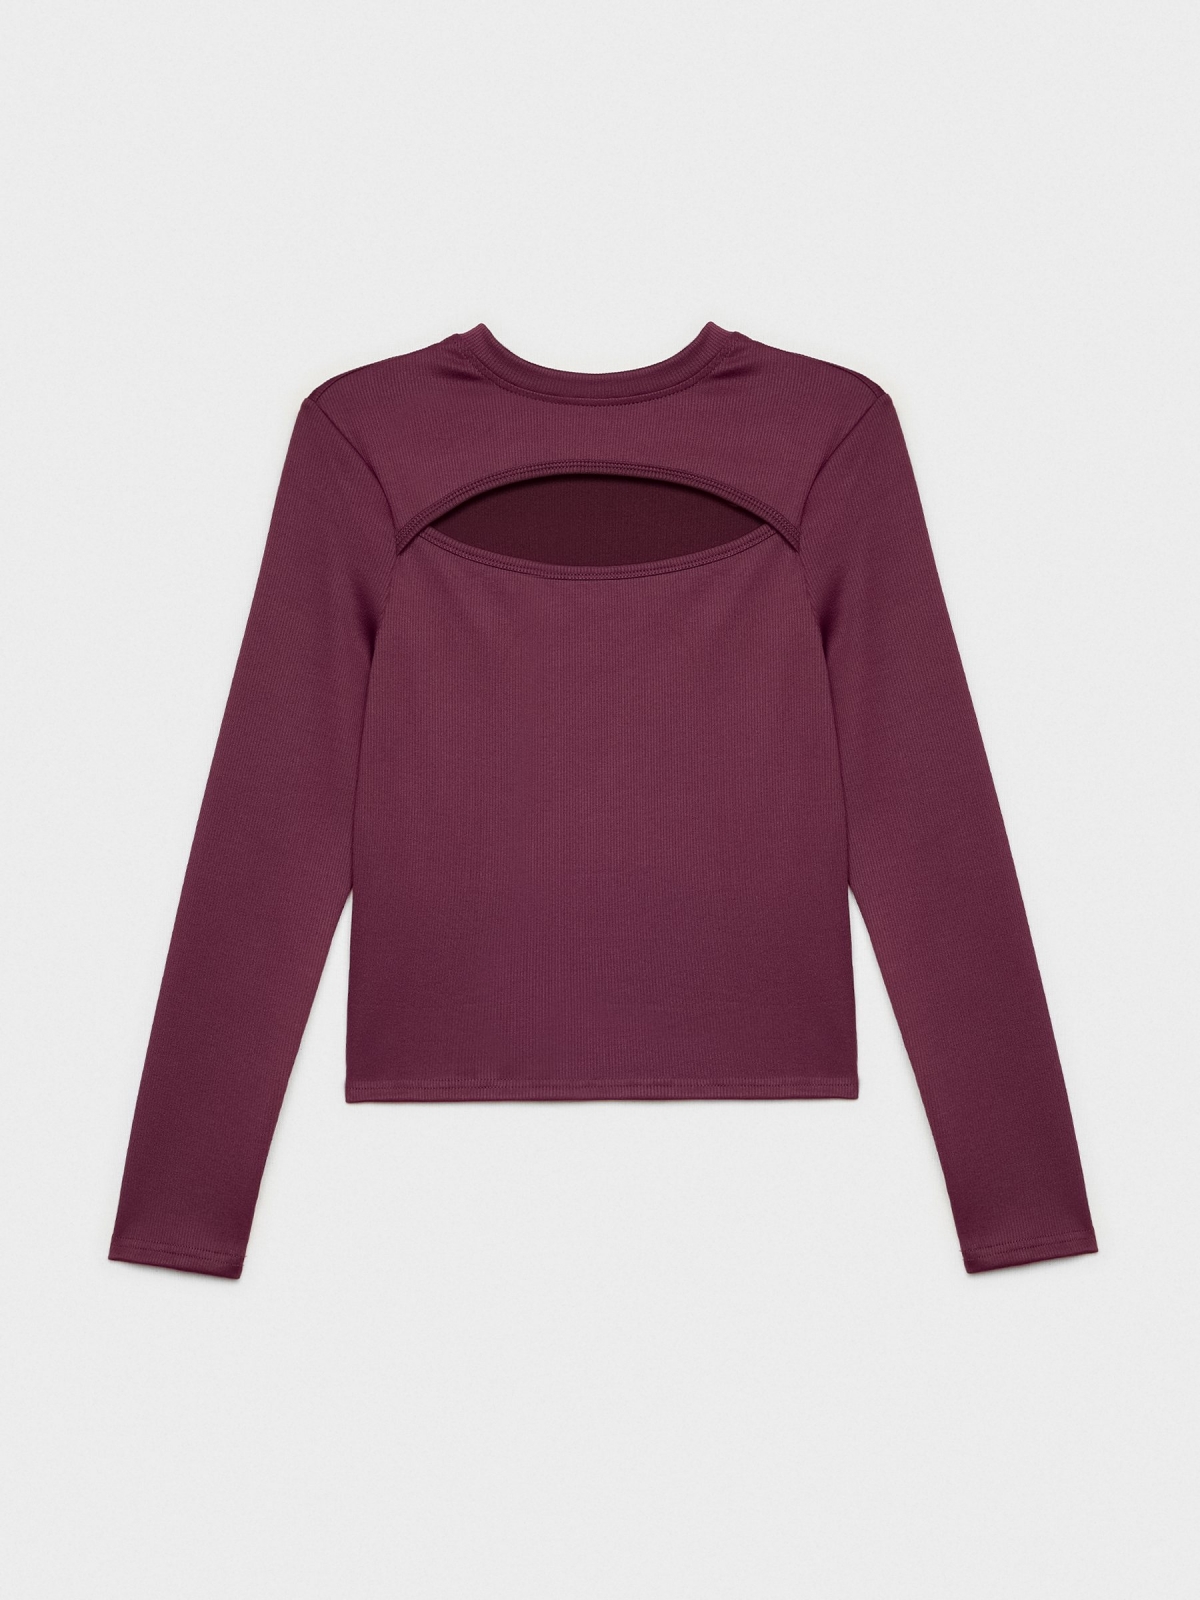  Long-sleeve cut-out ribbed t-shirt aubergine